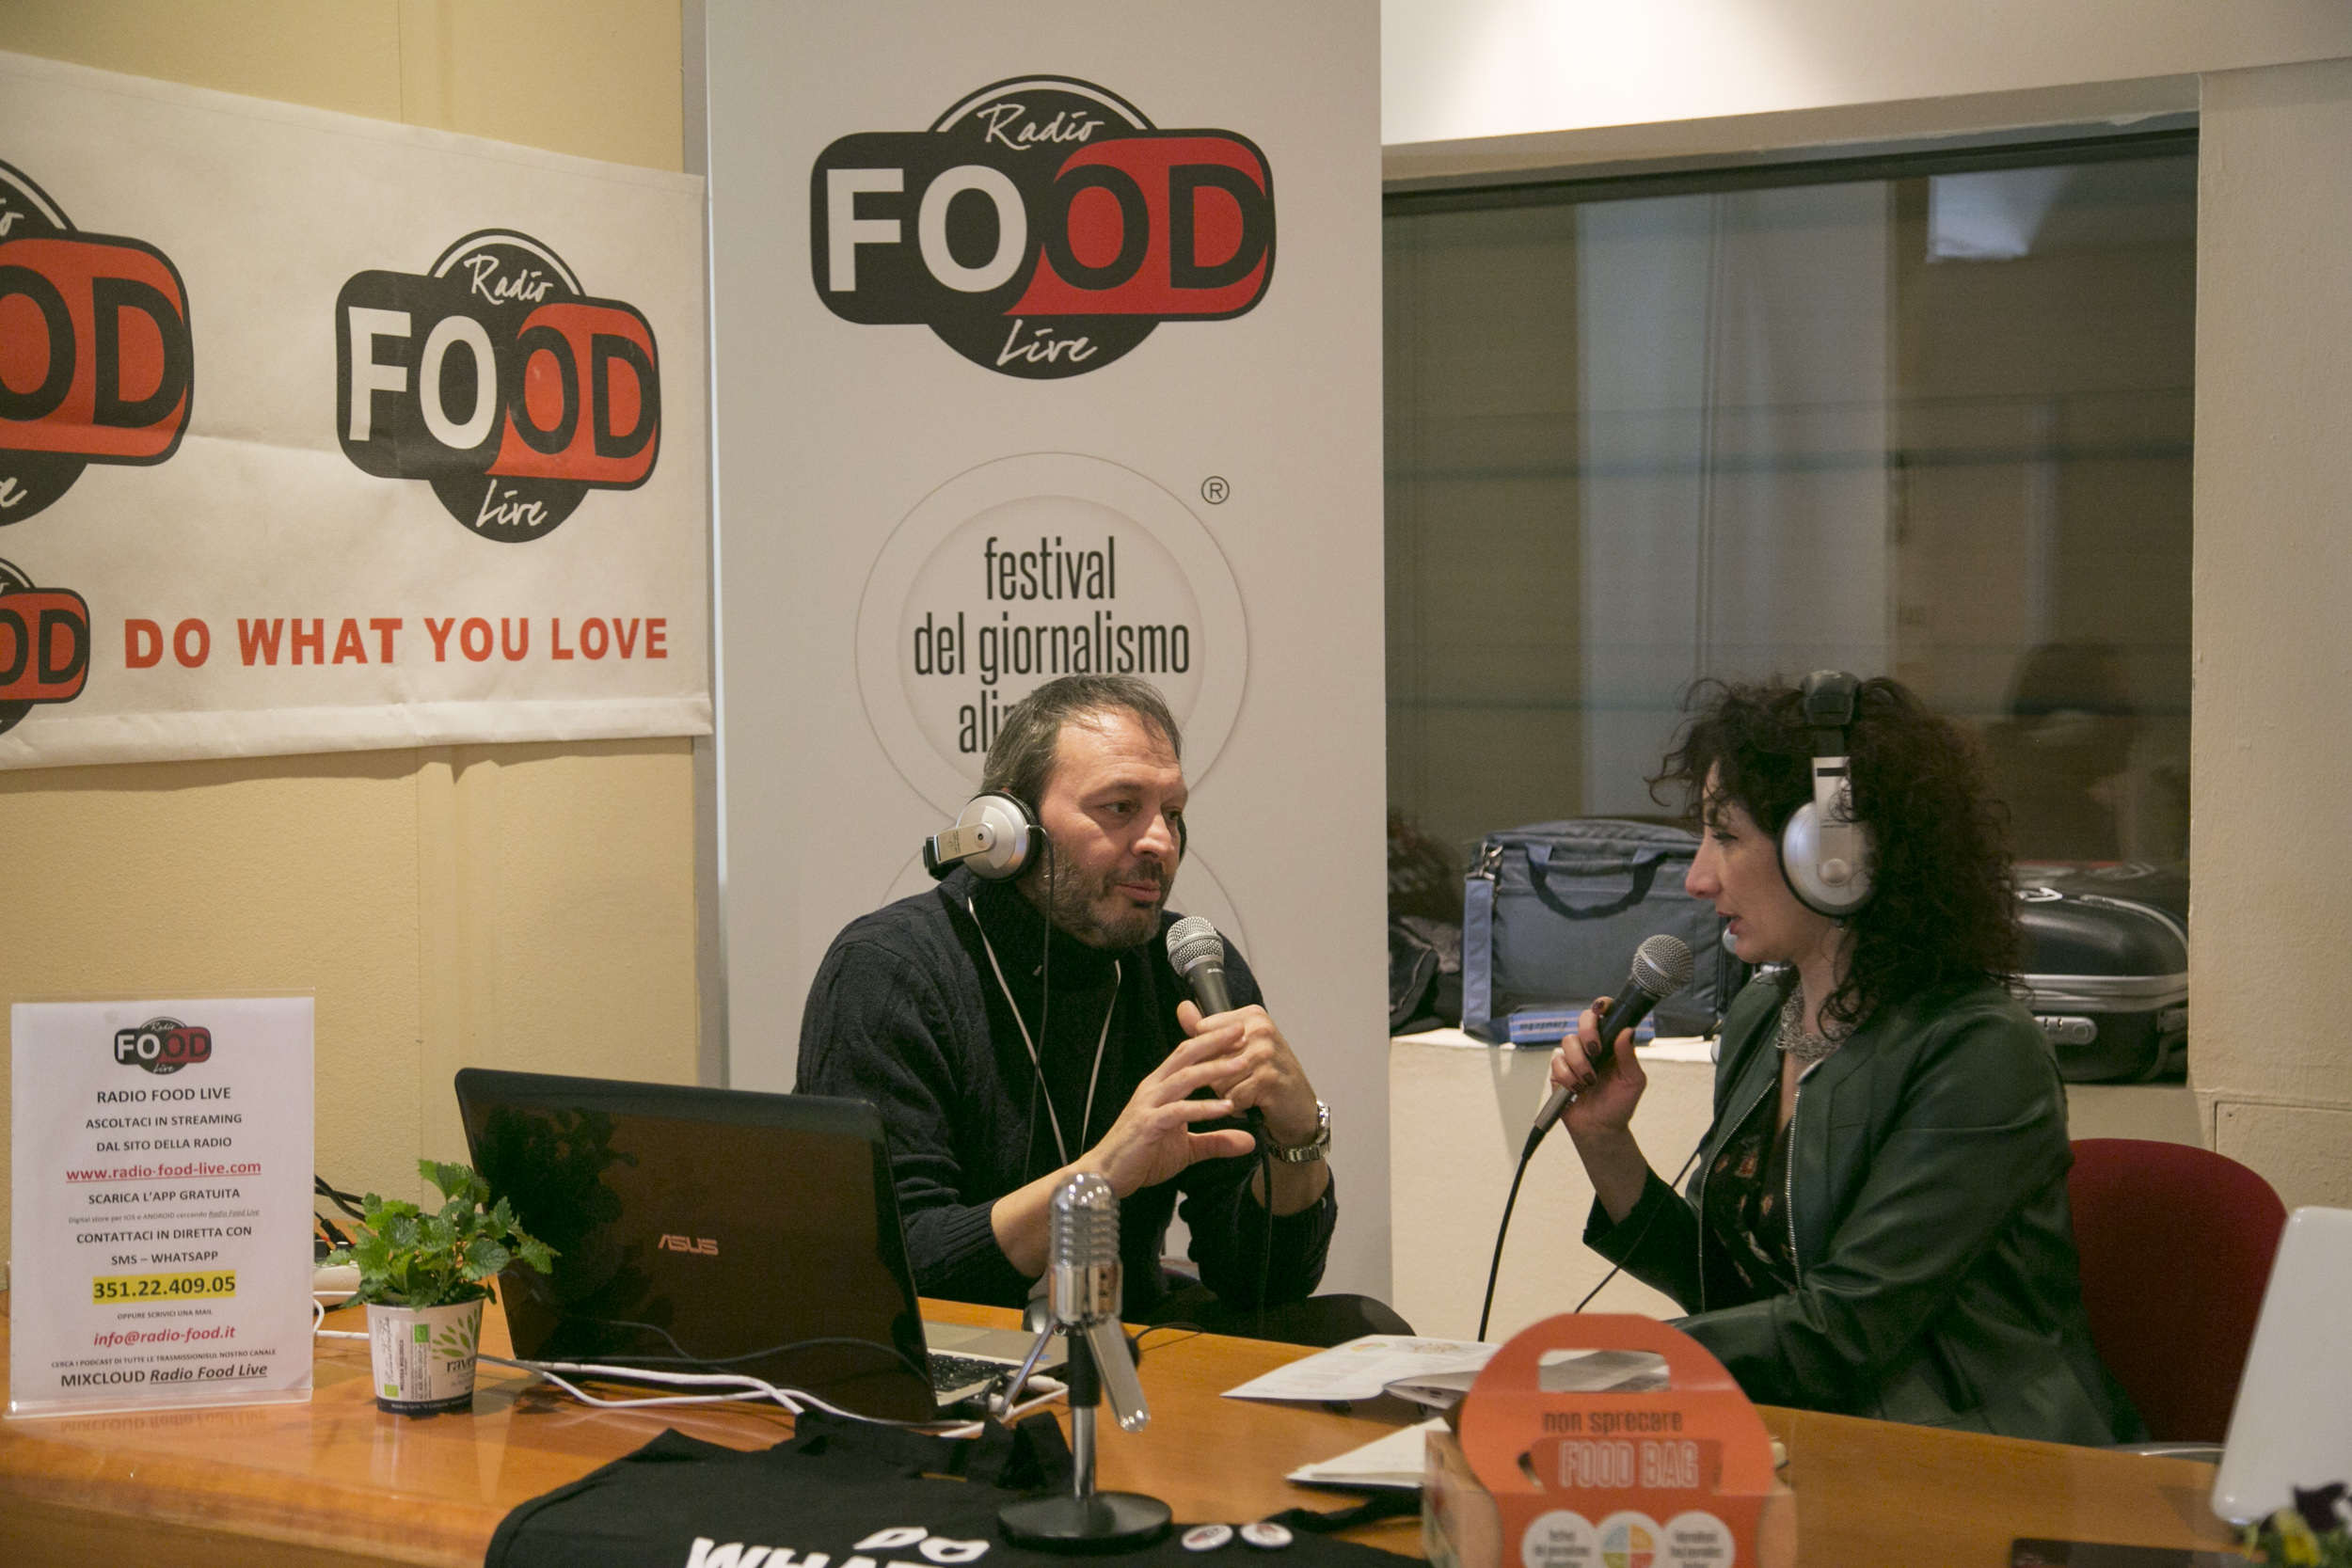 Radio Food live from the 2020 Festival